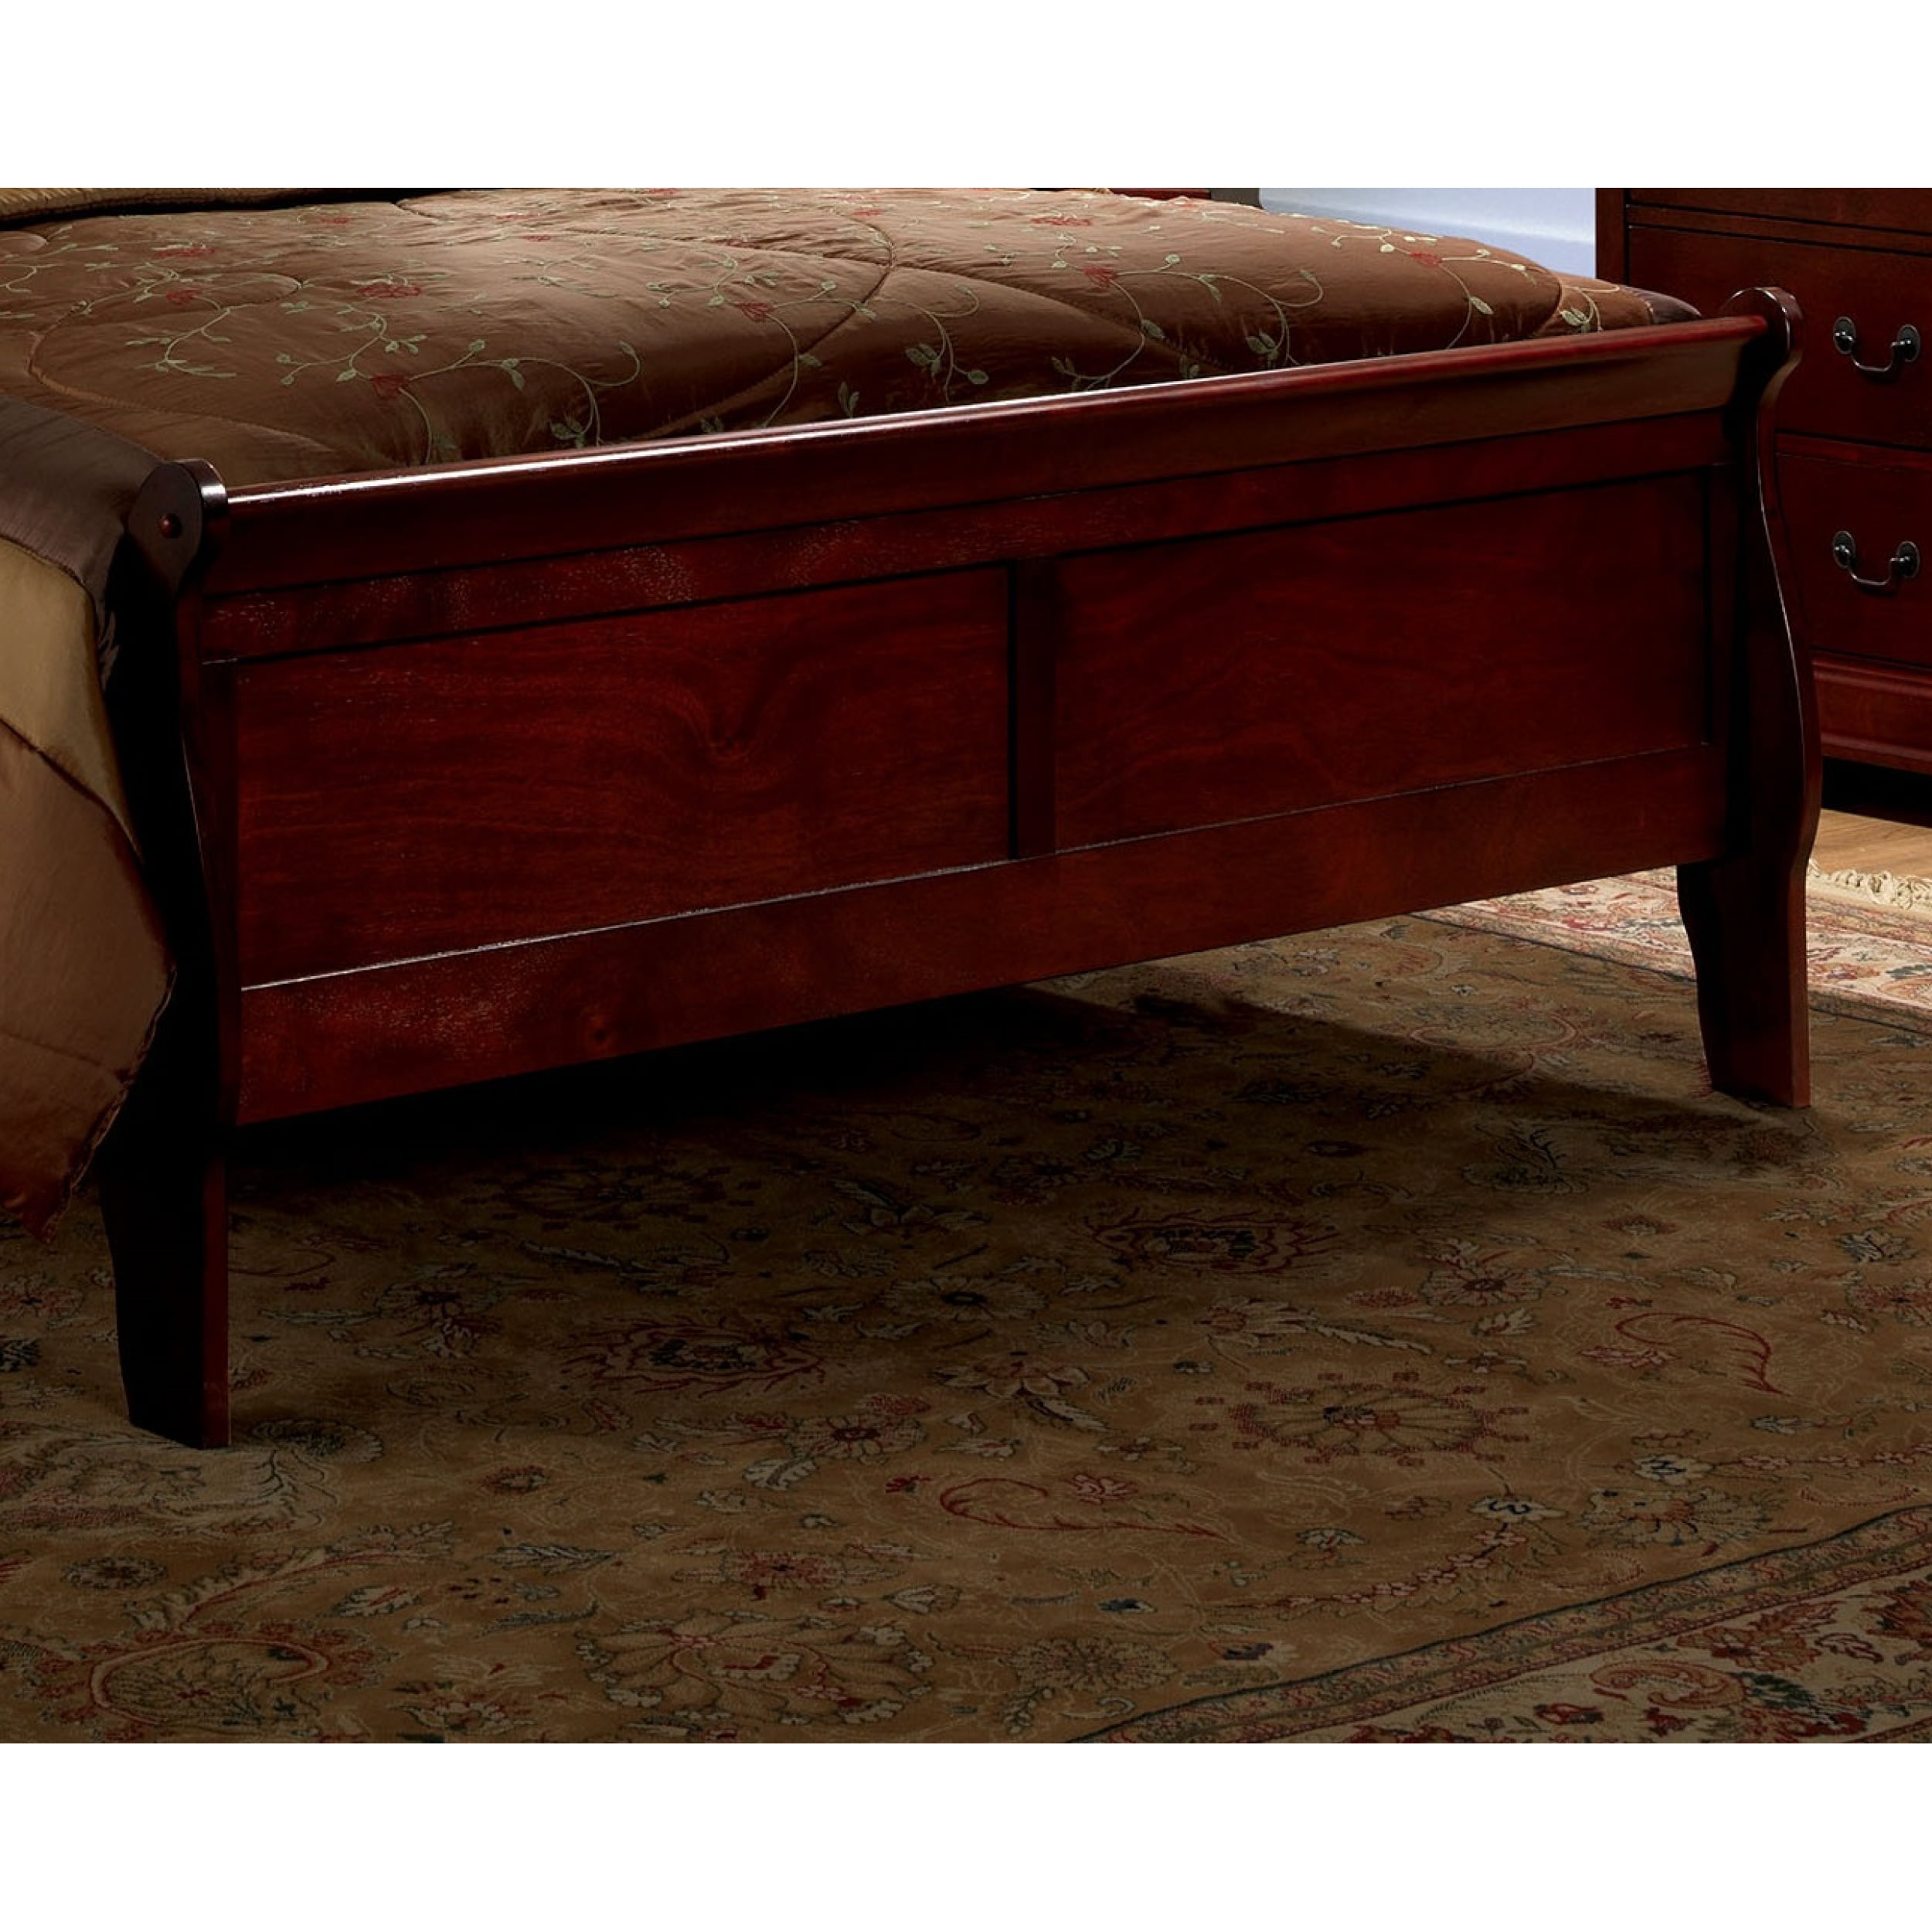 Louis Philippe Eastern Panel Sleigh Bed Cappuccino - King 202411KE by Coaster  Furniture at Tomlinson Furniture